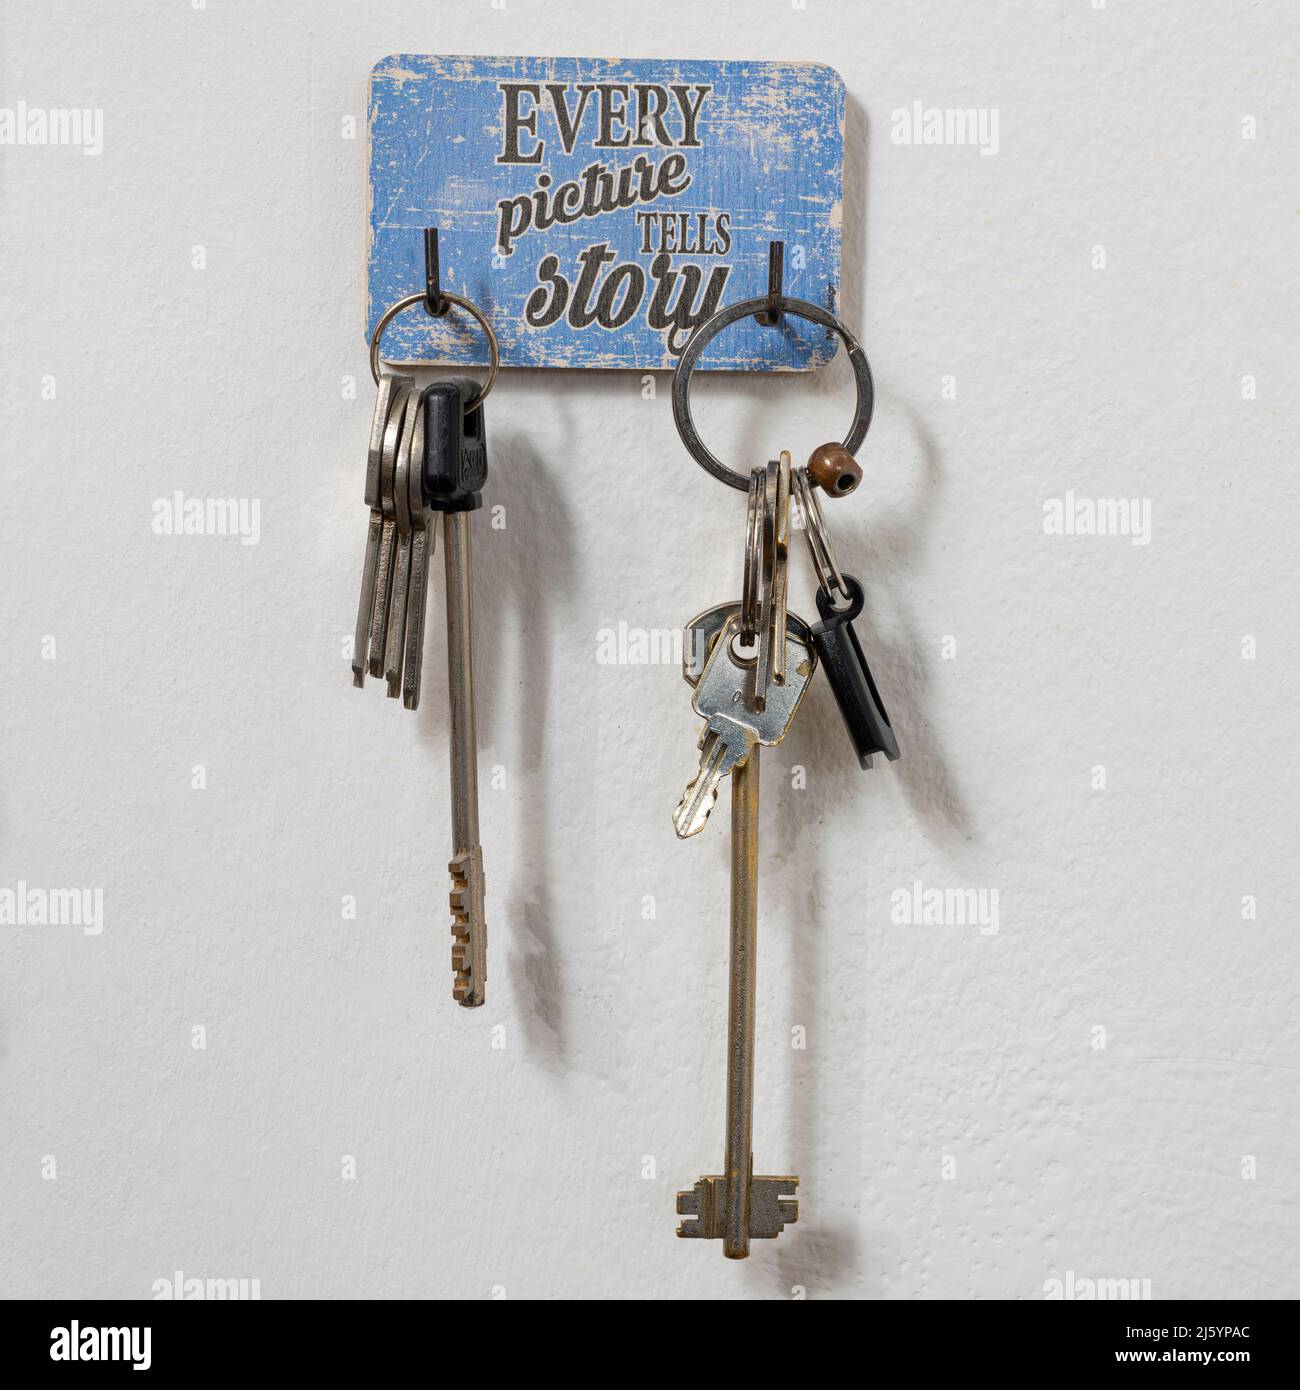 the words 'every picture tells a story' on a key ring hanging on the wall Stock Photo